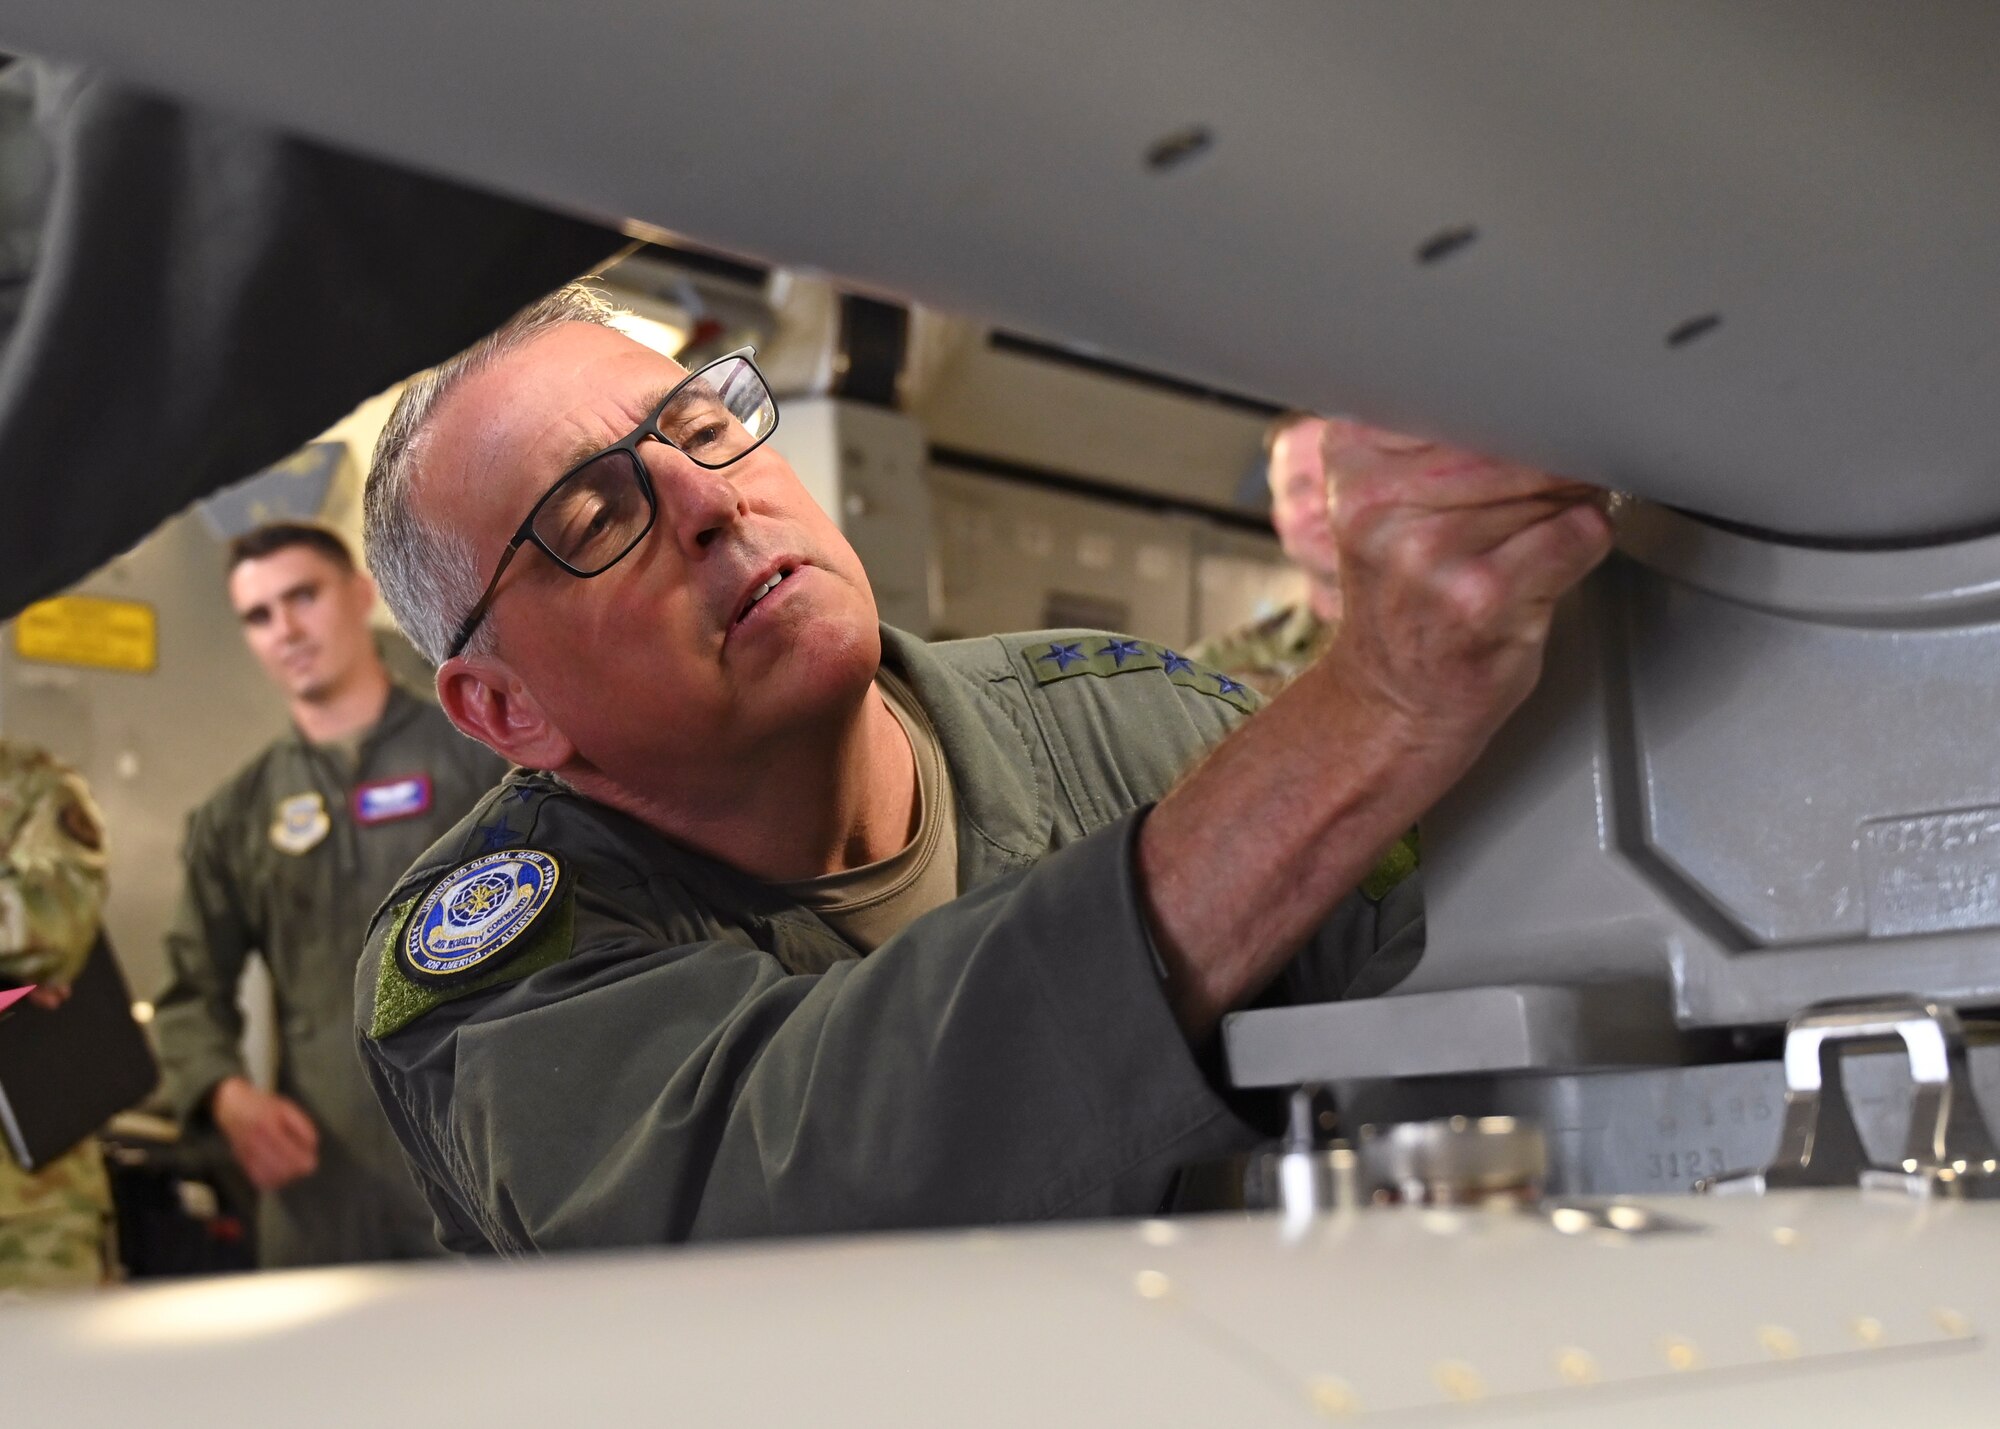 U.S. Air Force Gen. Mike Minihan, Air Mobility Command commander, disarms a weapon on a C-17 Globemaster III during his visit to Joint Base Lewis-McChord, Washington, July 7, 2022. Minihan and Chief Master Sgt. Brian Kruzelnick, AMC command chief, spent two days visiting Team McChord to experience the way America’s Airlift Wing executes rapid global mobility. (U.S. Air Force photo by Senior Airman Callie Norton)